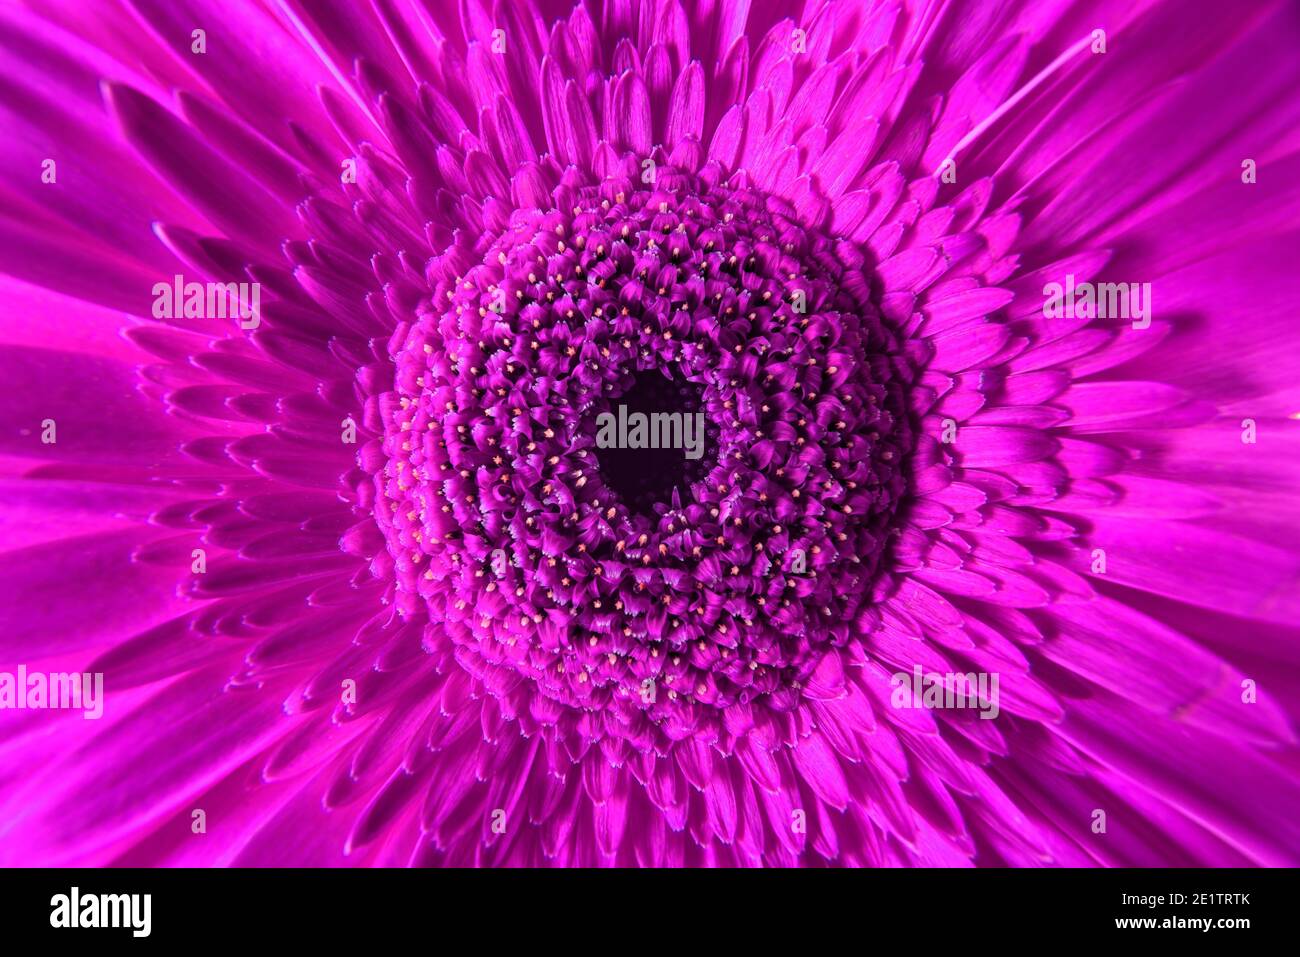 Macro photography of purple gerbera flower, fresh nature plant close-up. Floral texture pattern for background or wallpaper, detail of pink flower wit Stock Photo